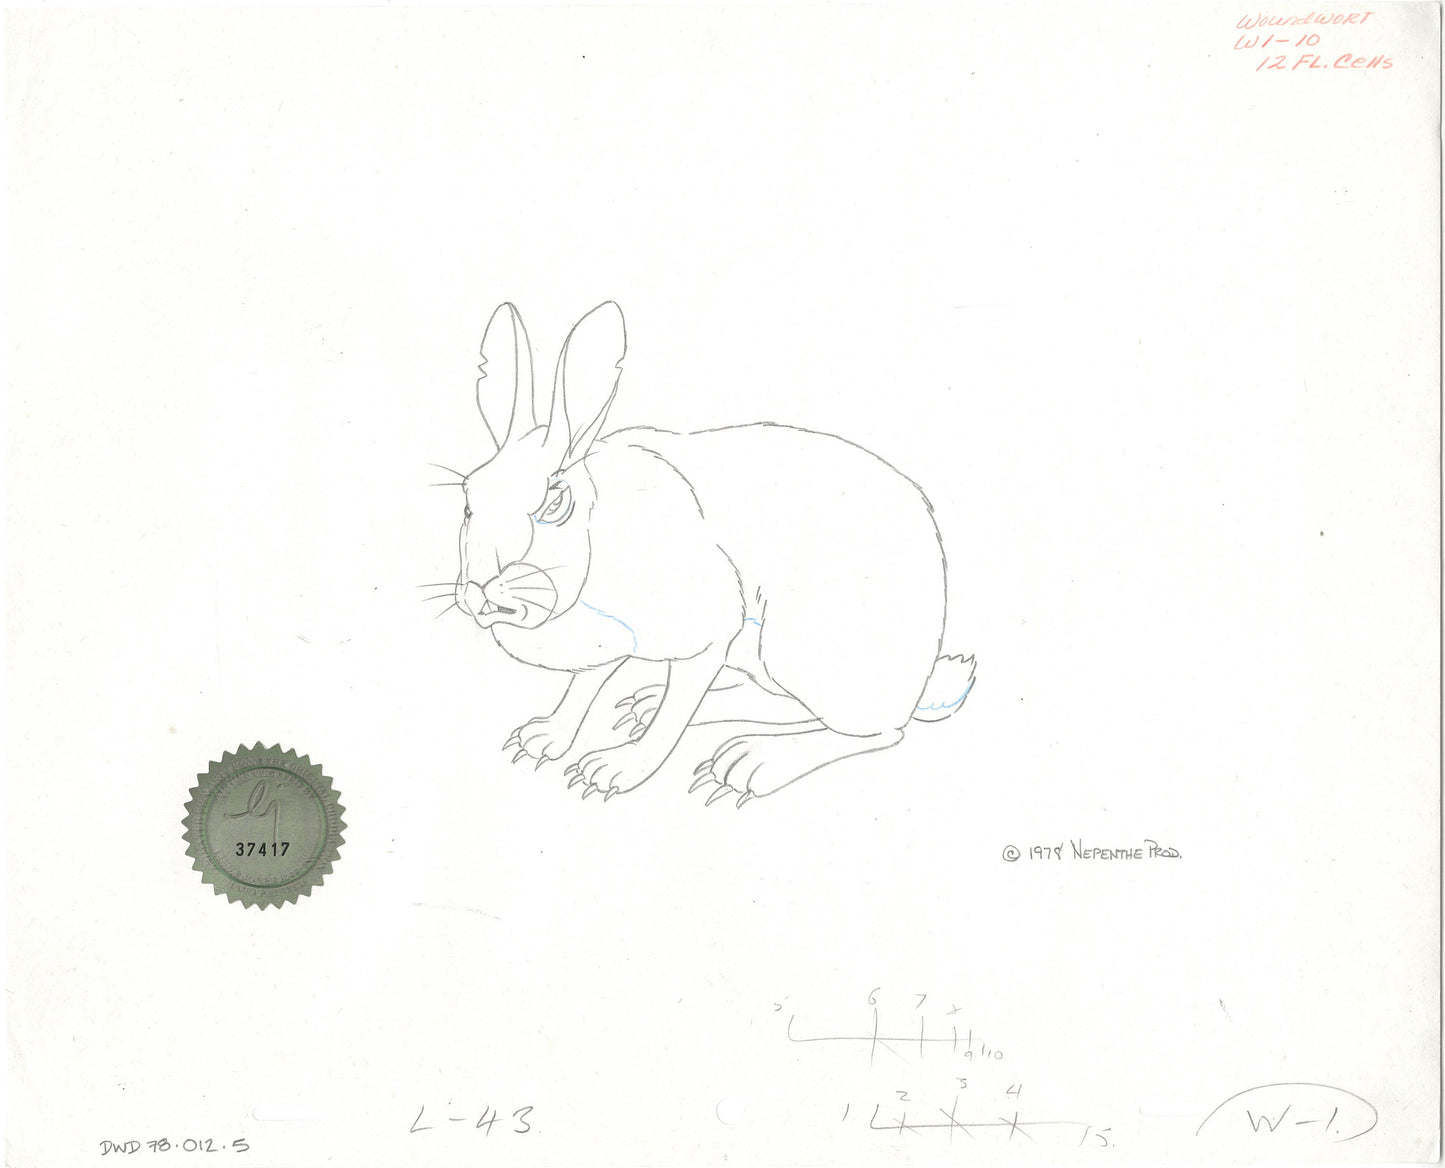 Watership Down 1978 Production Animation Cel Drawing of Woundort with Linda Jones Enterprise Seal and Certificate of Authenticity 012-005